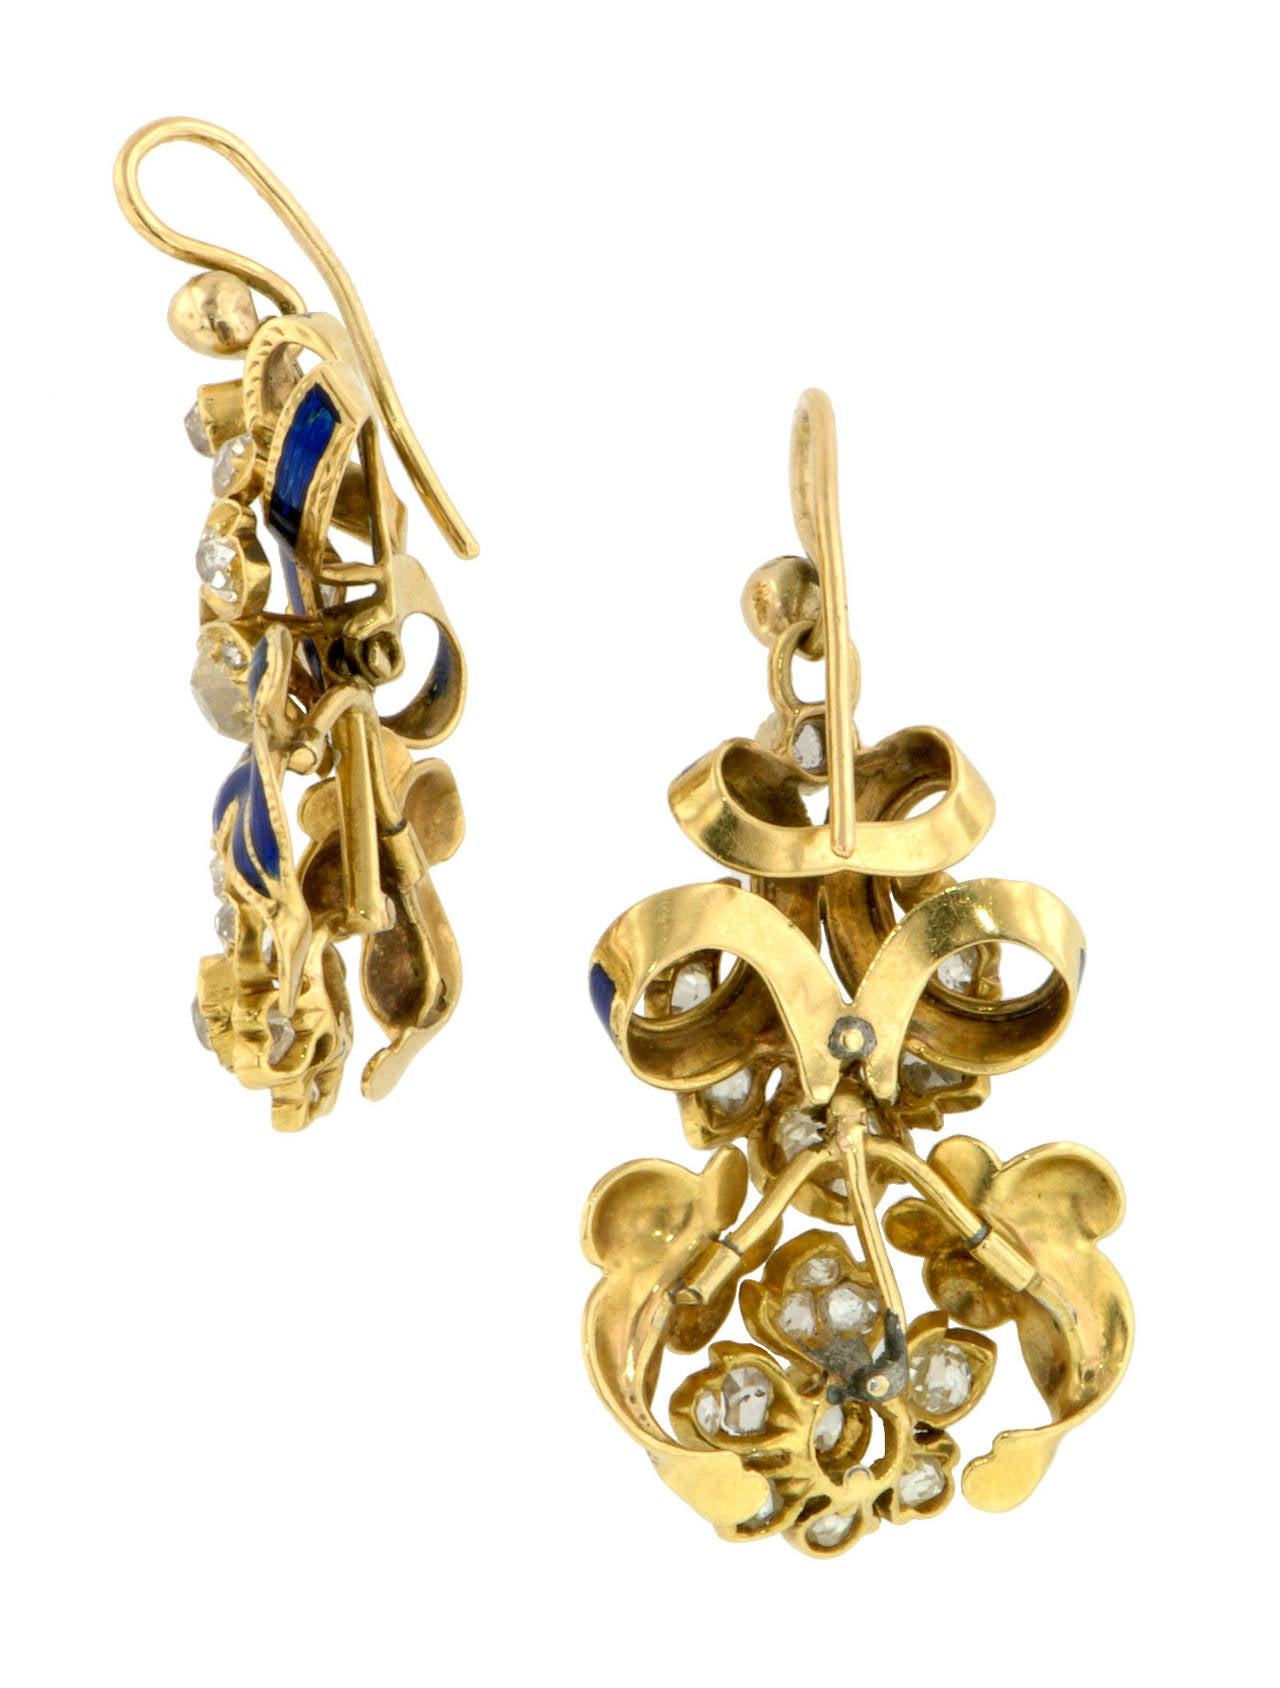 Victorian Diamond & Blue Enamel Earrings measuring app. 1 5/8 inches (including ear wire) x 7/8 inch wide, featuring Old Mine cut diamonds weighing app. 3.20ctw., and Rose cut diamonds measuring app. 1.5mm, in a ribbon & flower design with blue